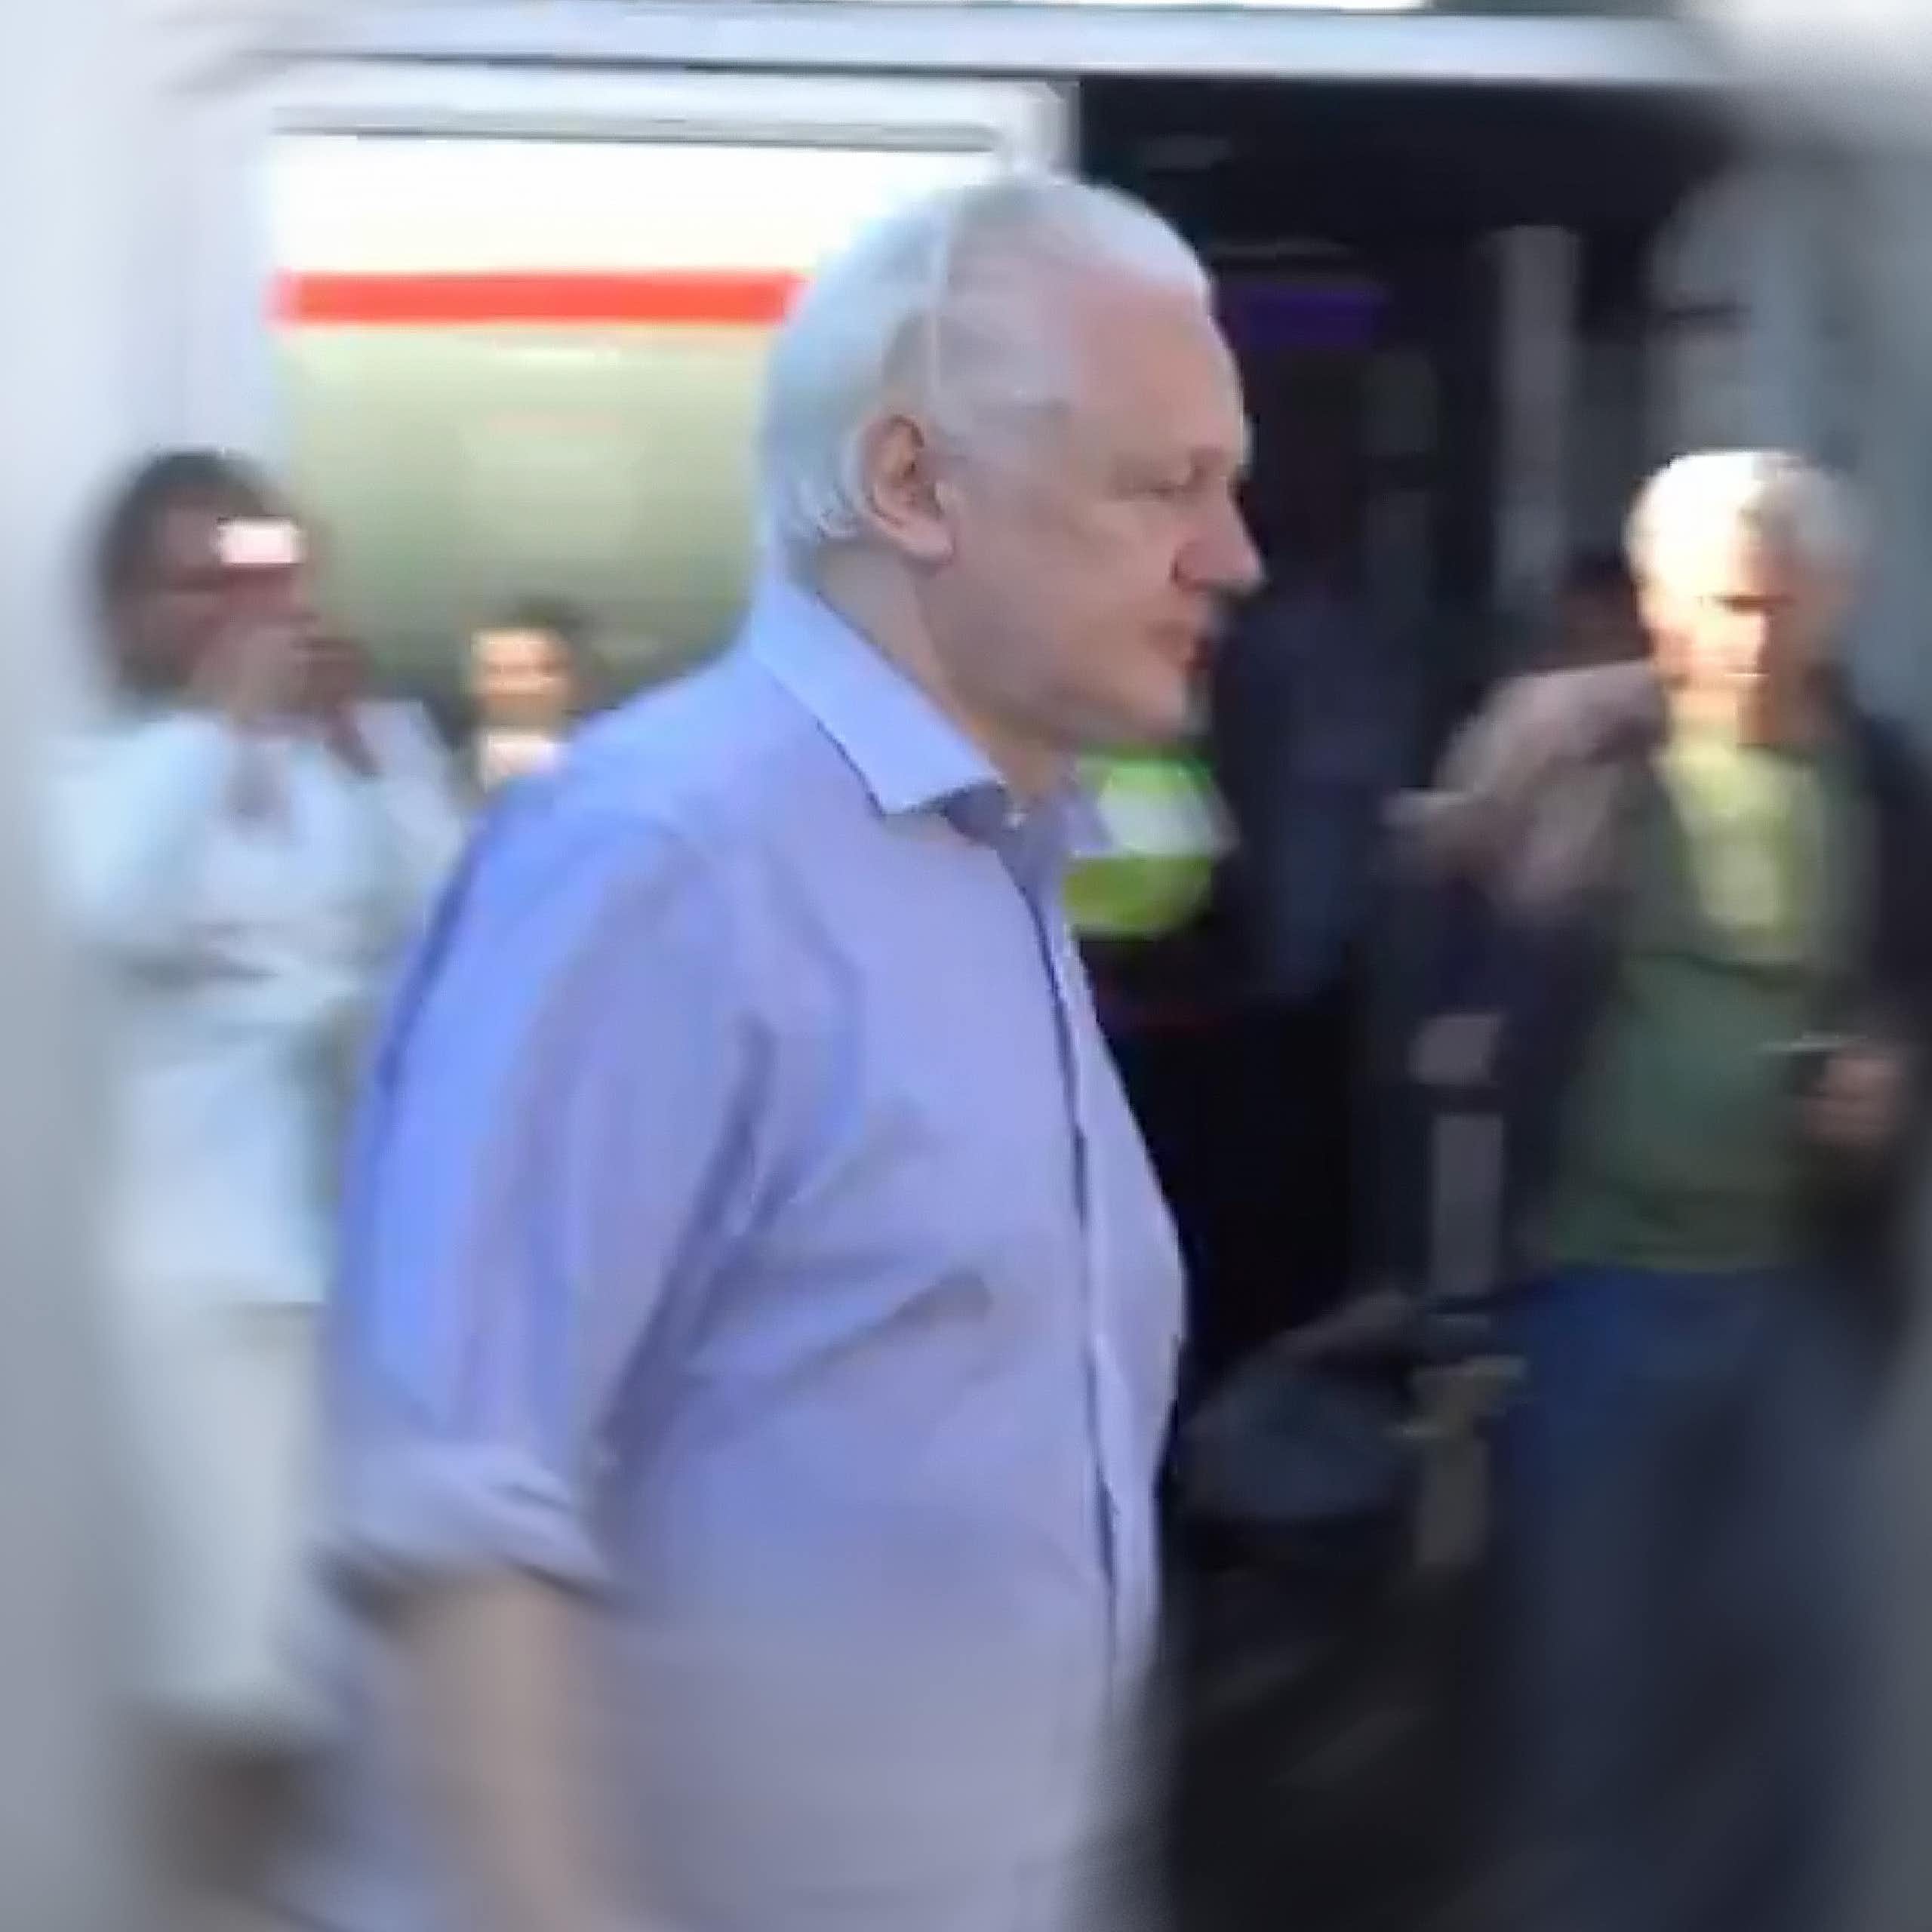 Julian Assange walking to a plane after being released